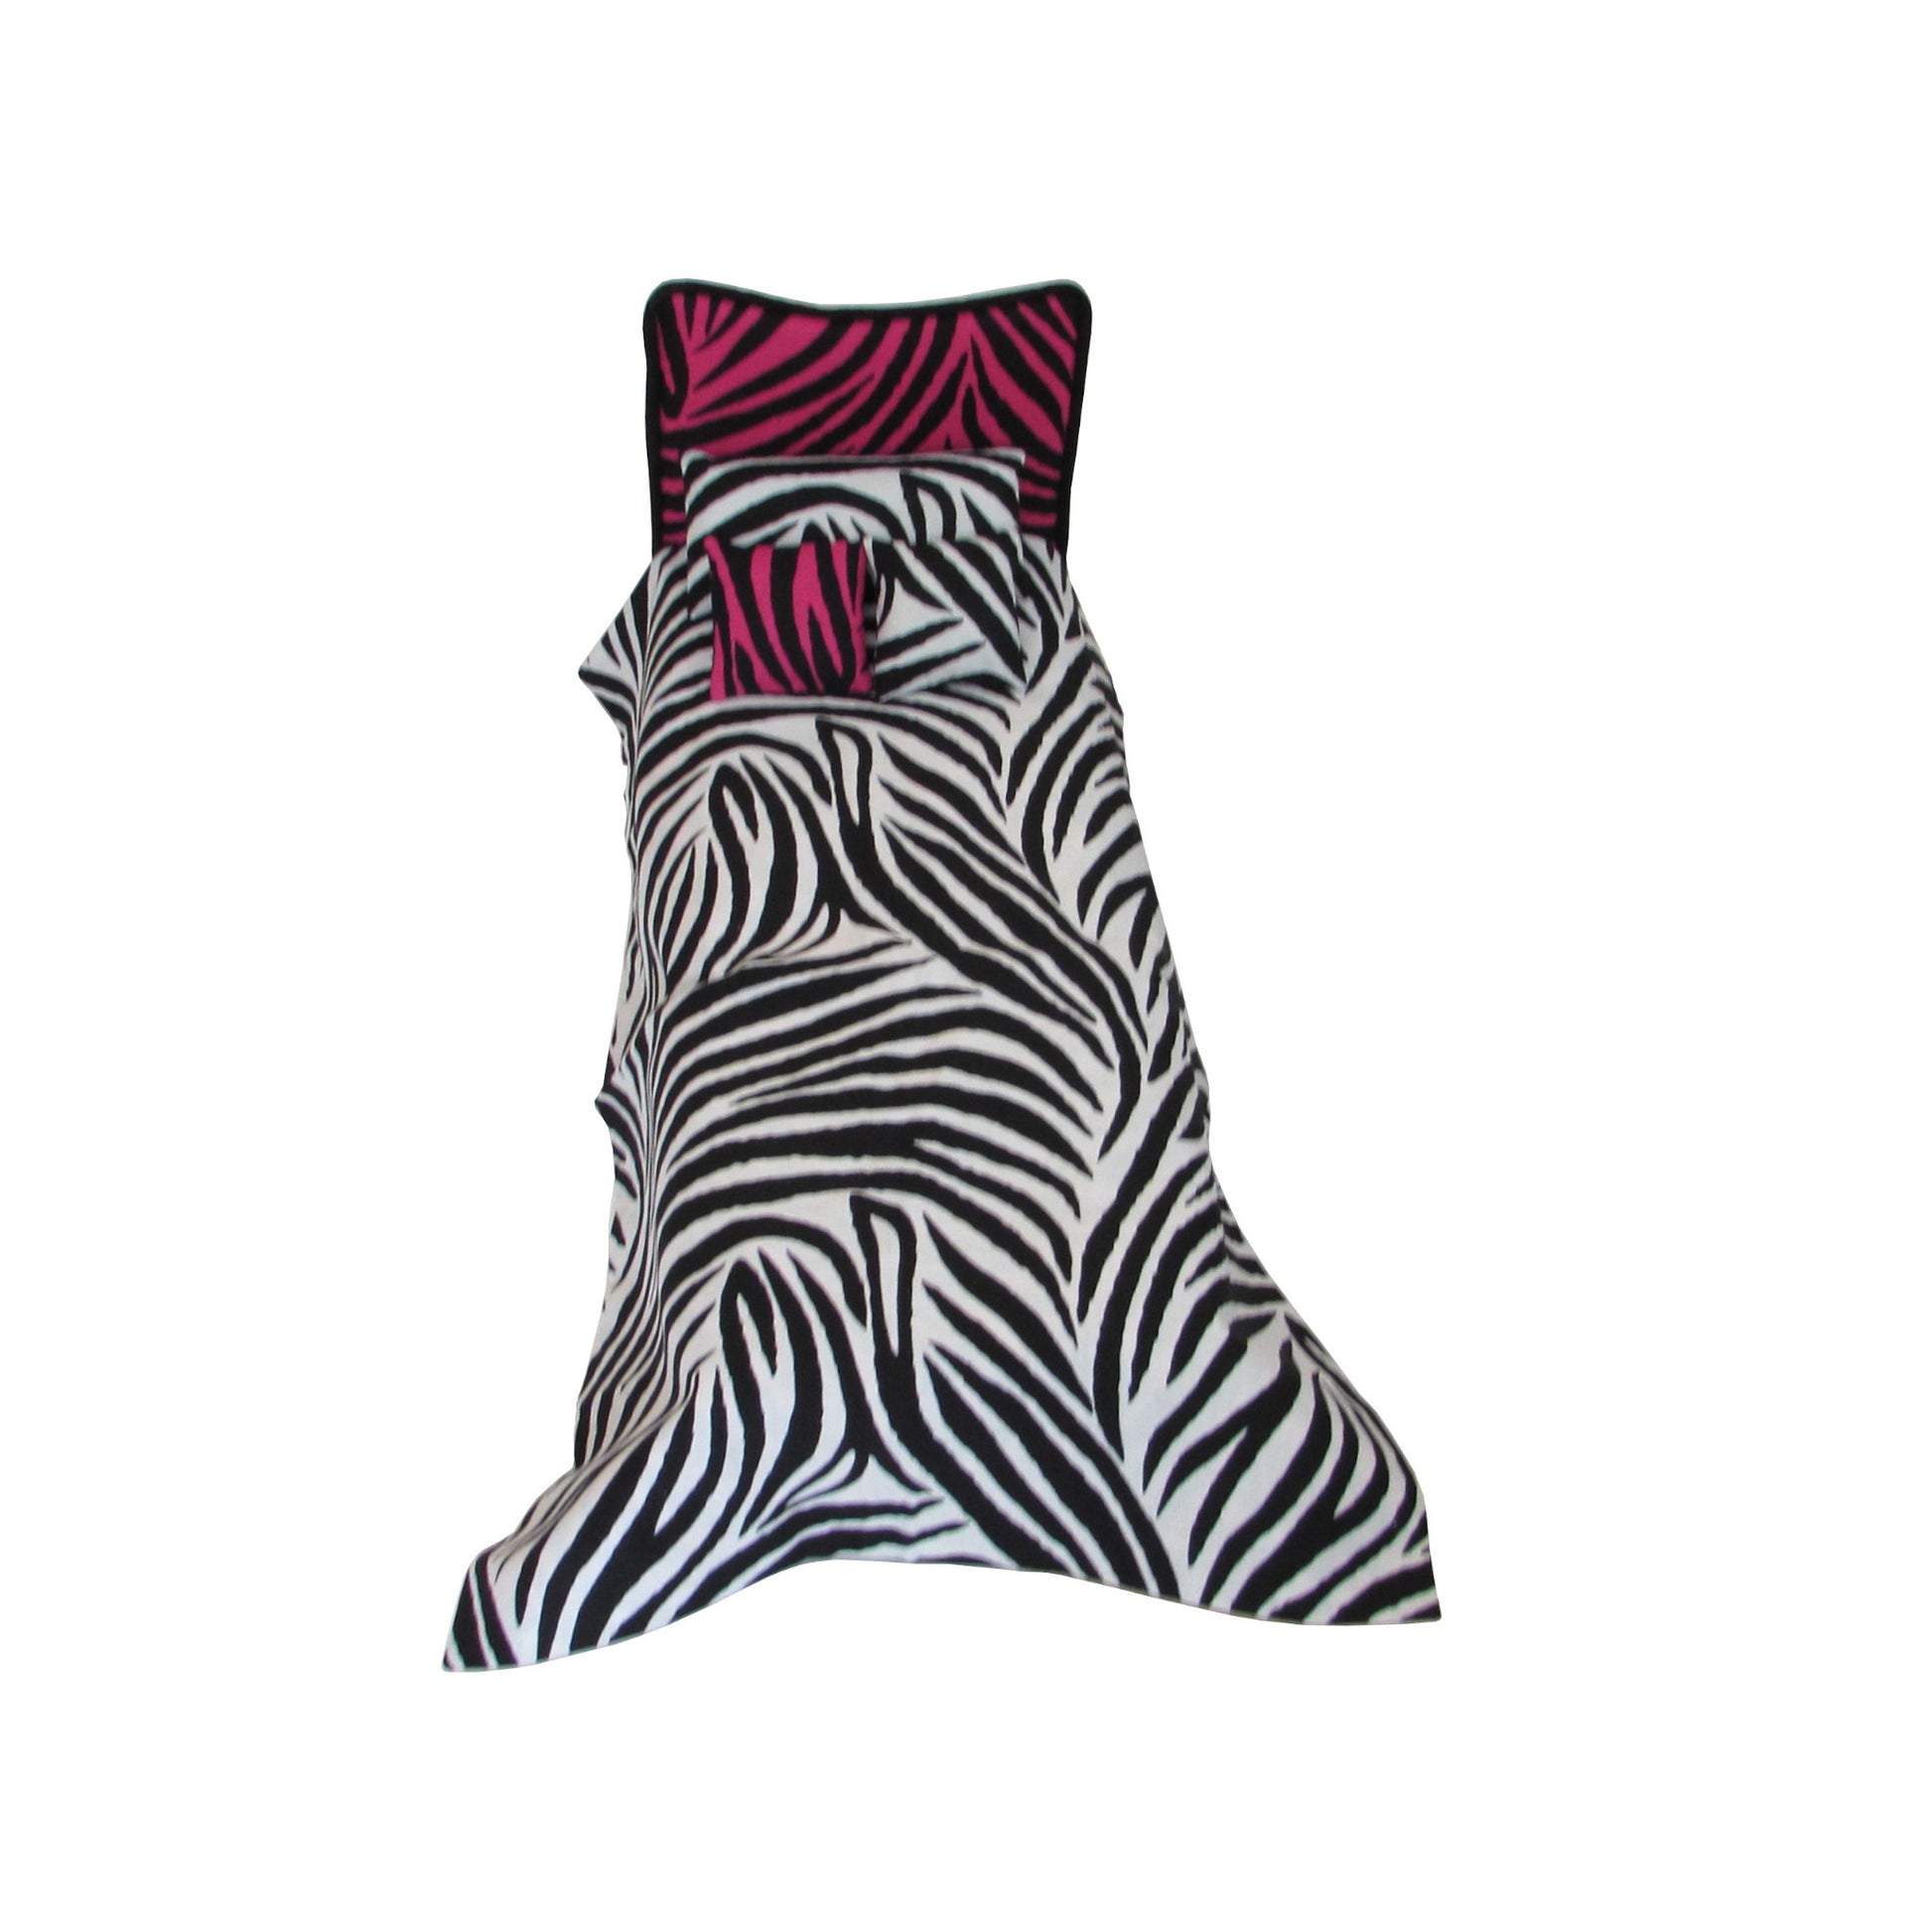 Pink Zebra Print Black Doll Bed and White Zebra Print Doll Bedding for 11.5-ubcg abd 12-inch dolls Second view